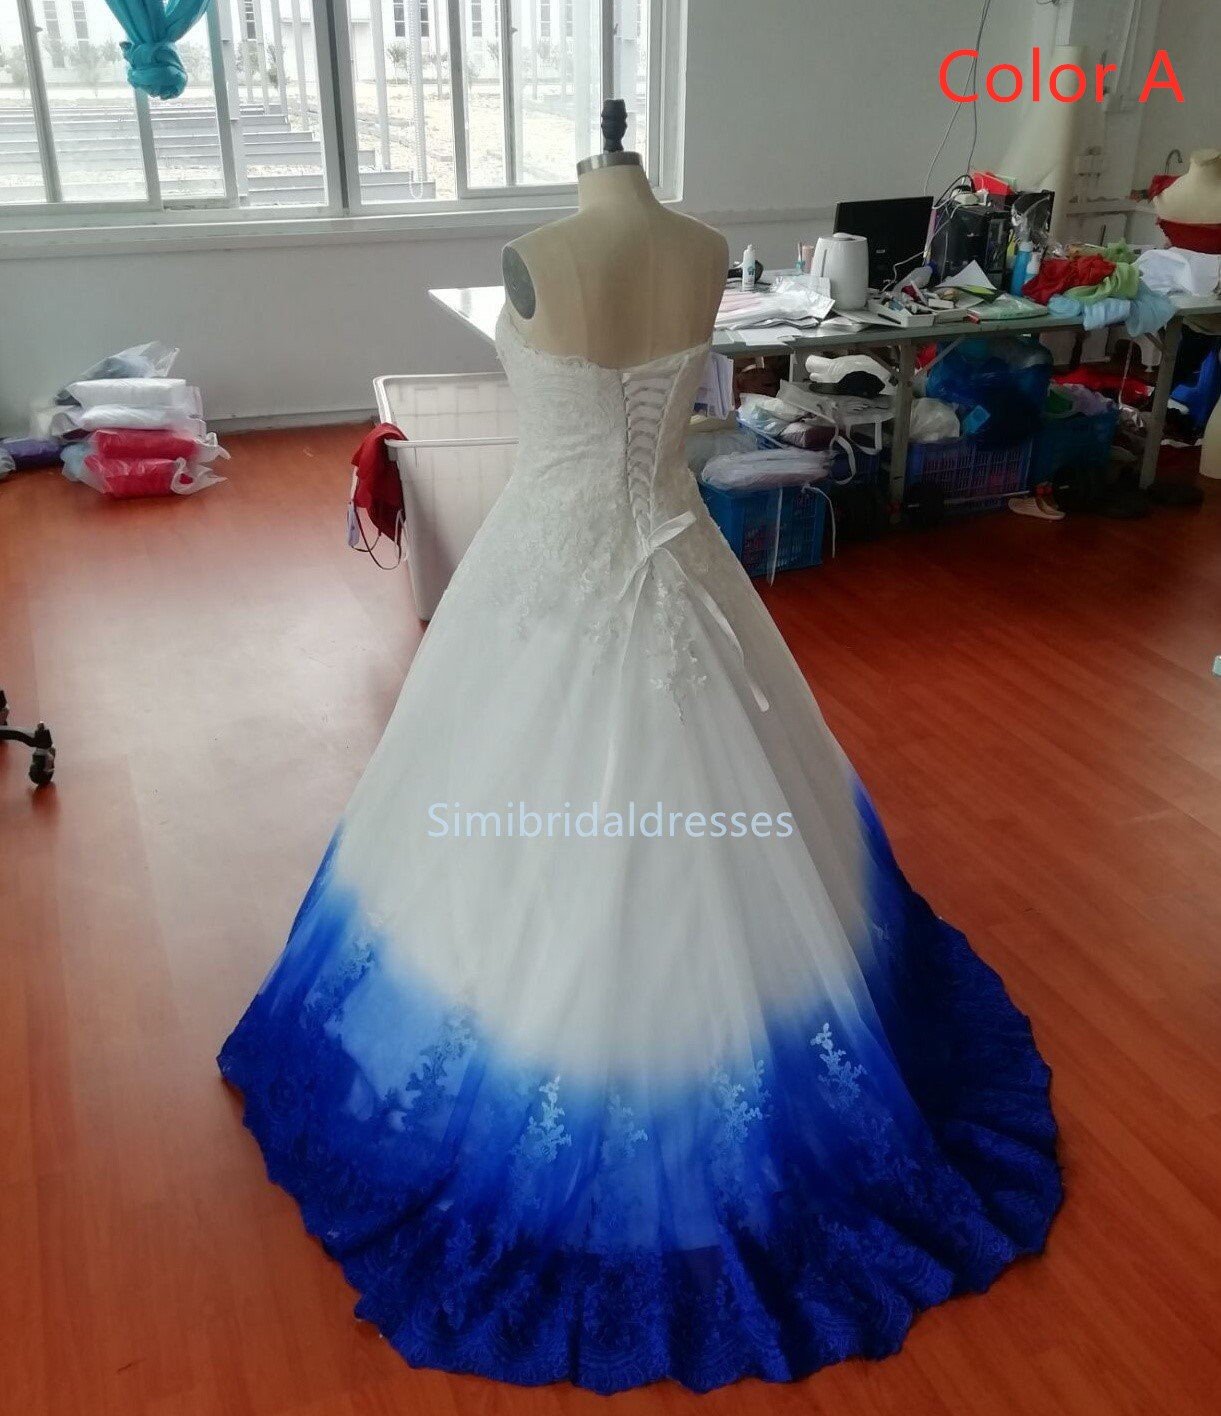 Royal Blue Ombre Prom Dress Sweetheart, Ball Gown Lace Applique Long Wedding Dresses N1800